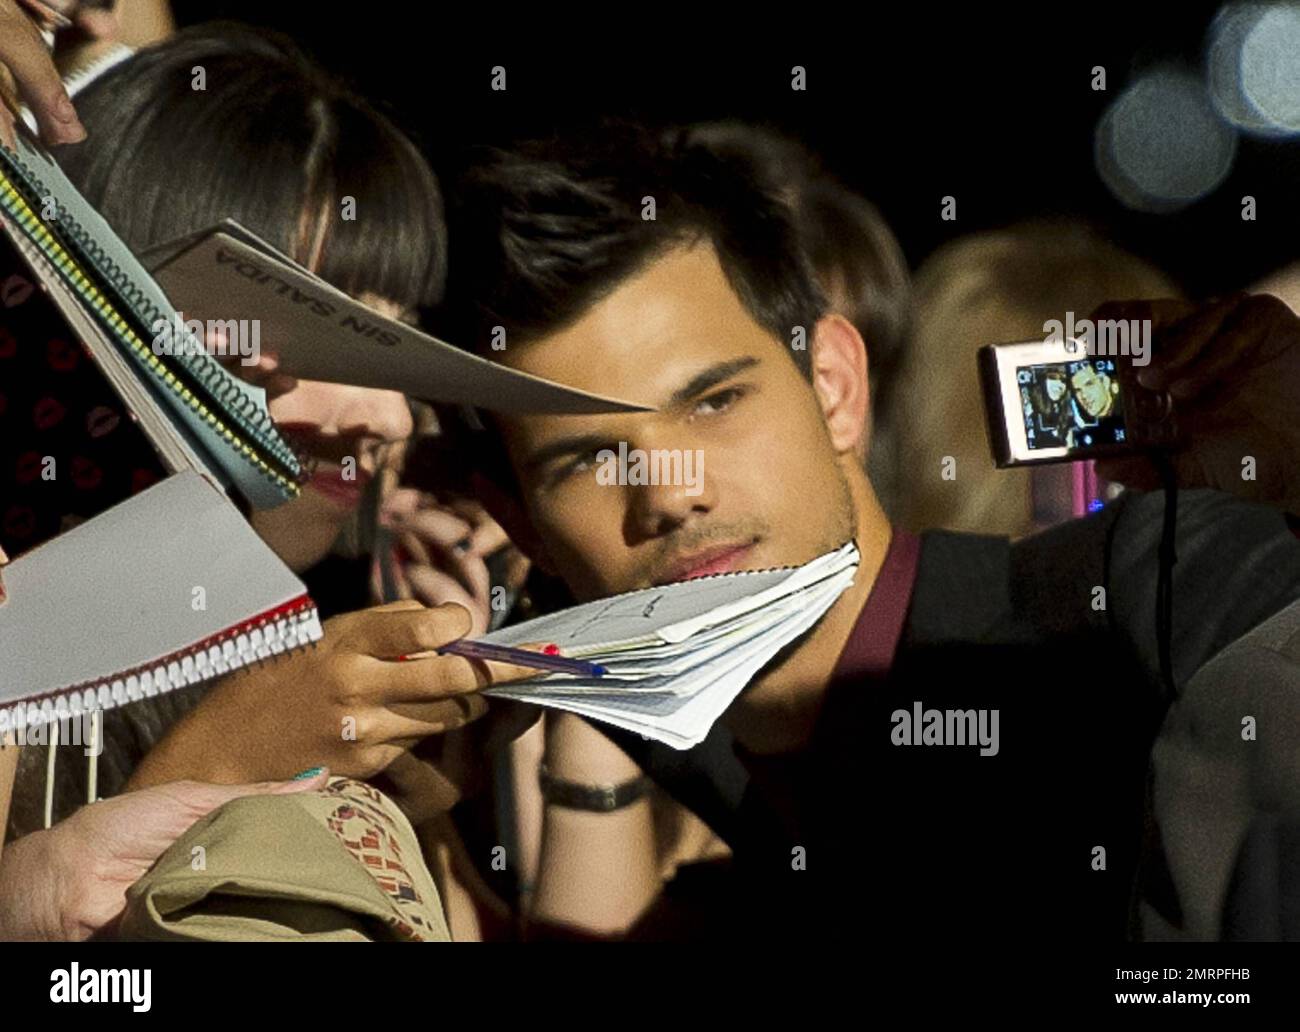 USA, CANADA, LATIN AMERICA AND GREECE ONLY - Taylor Lautner stops and signs autographs as he arrives for the 'Sin Salida' (Abduction) Premiere held at Kinepolis Cinema. Madrid, Spain. 29th September 2011. Stock Photo